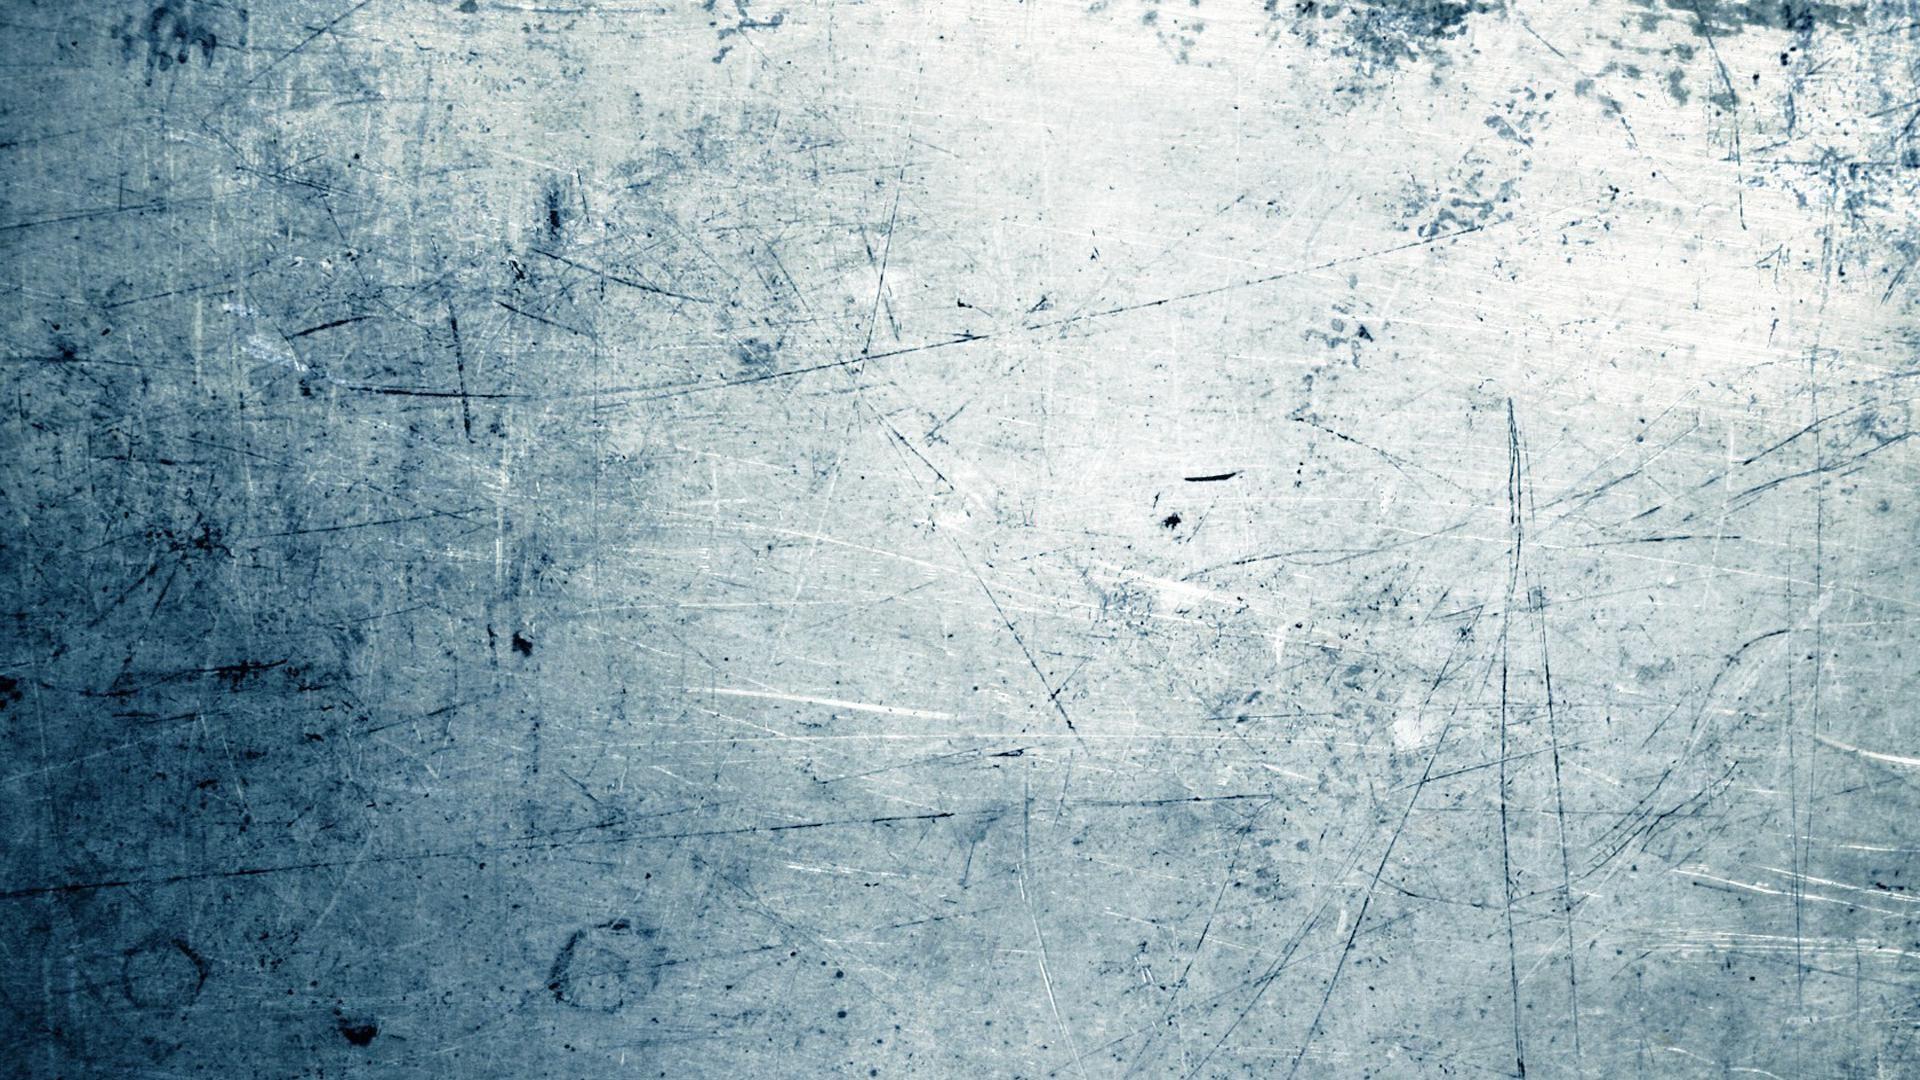 HD Grunge Wallpaper Texture Free. Abstract wallpaper, Grunge textures, Textured wallpaper